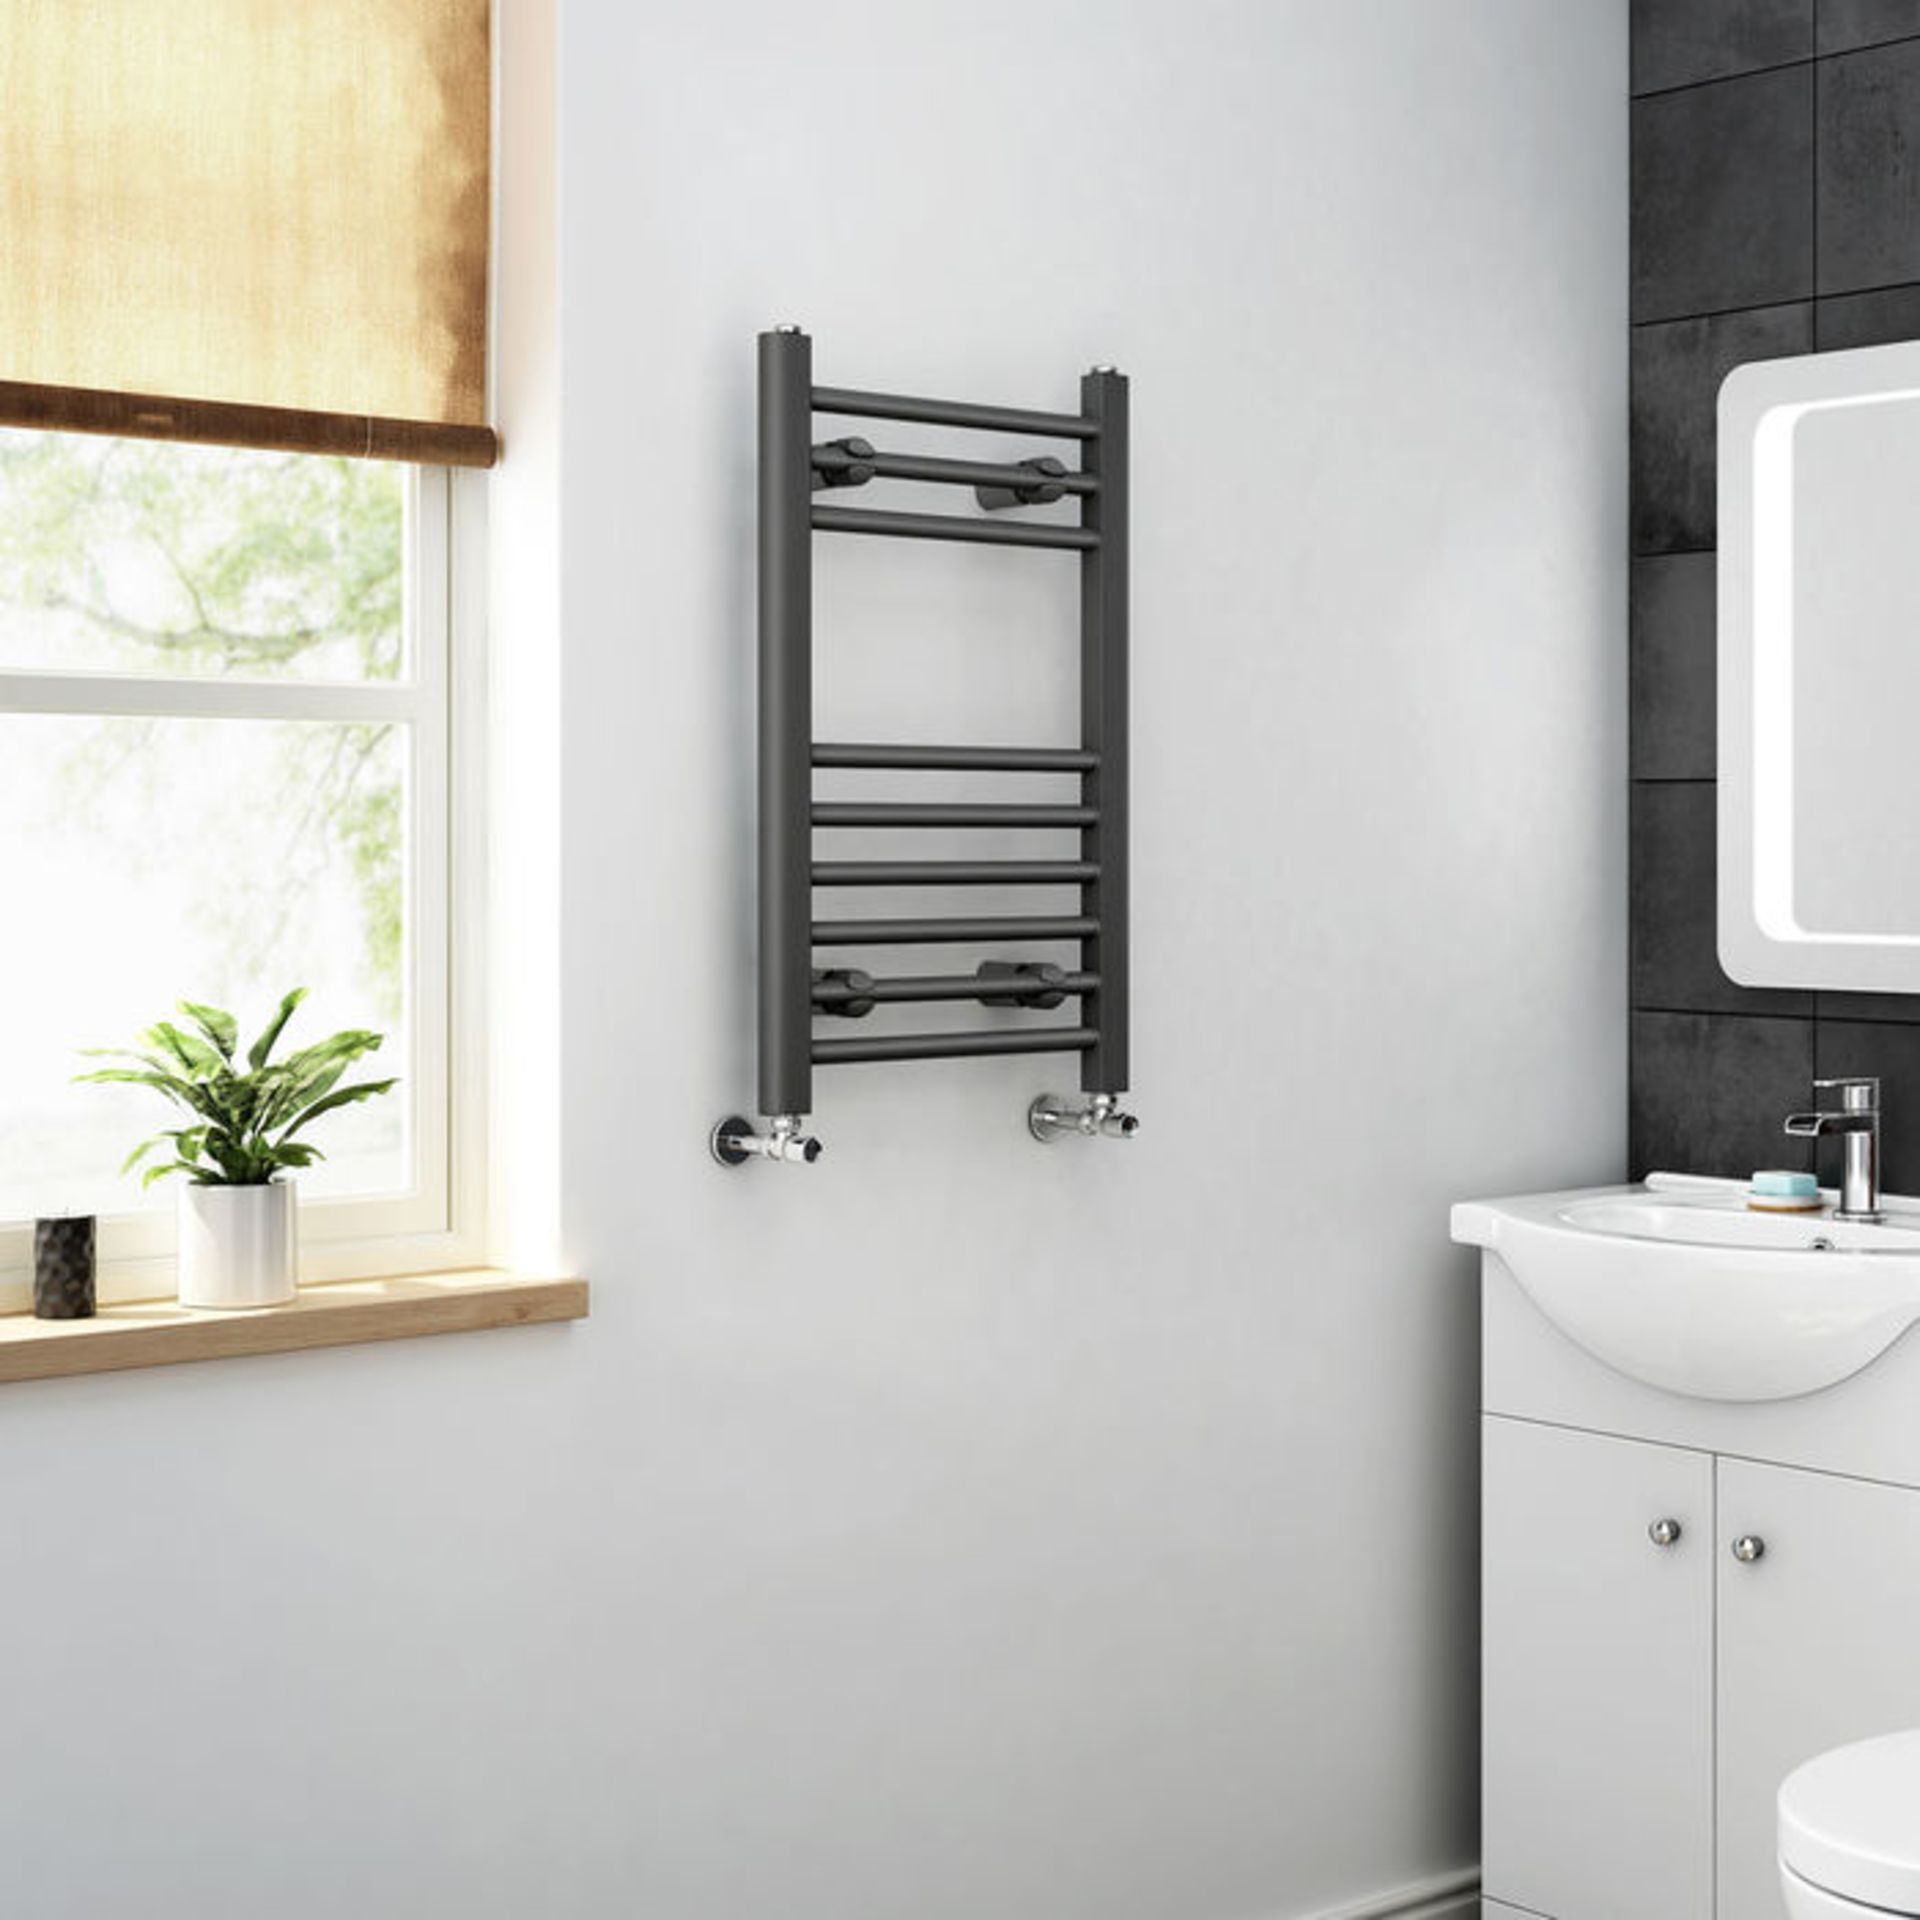 (LP69) 650x400mm - 20mm Tubes - Anthracite Heated Straight Rail Ladder Towel Radiator. Corrosion - Image 2 of 2